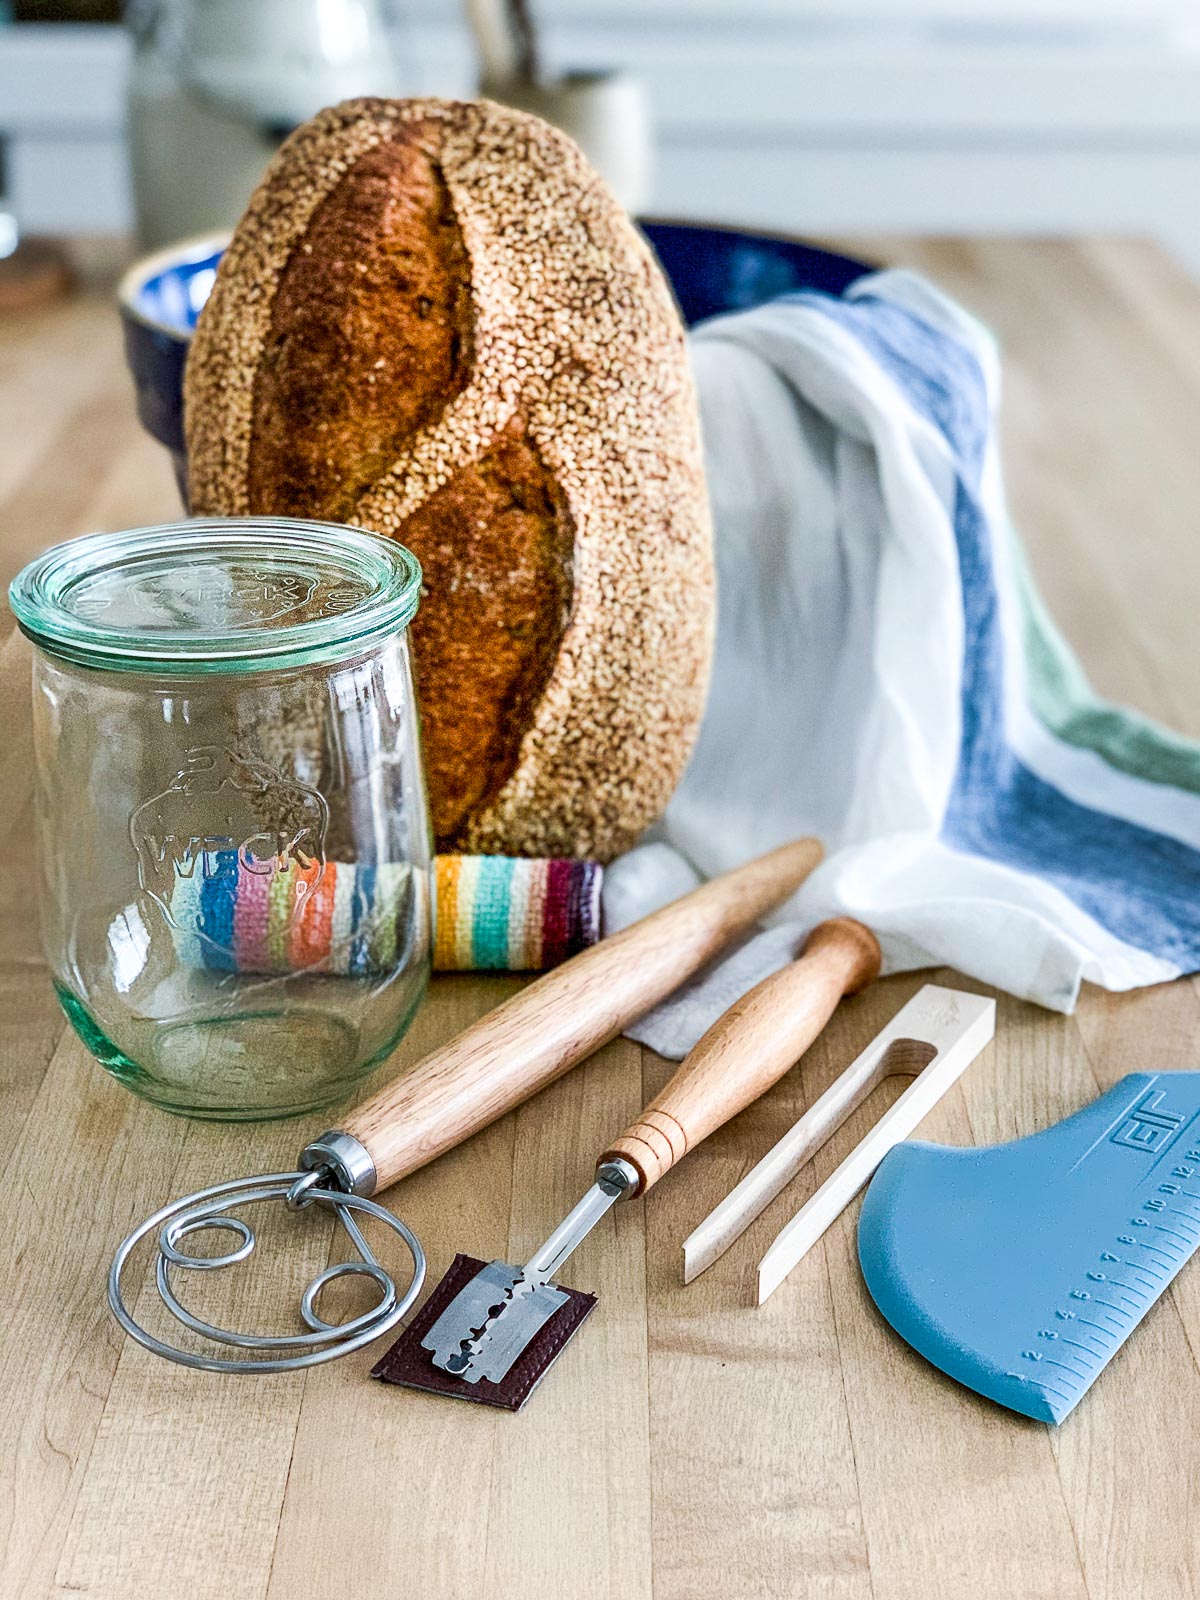 19 Bread Baking Supplies That Will Up Your Bread Making